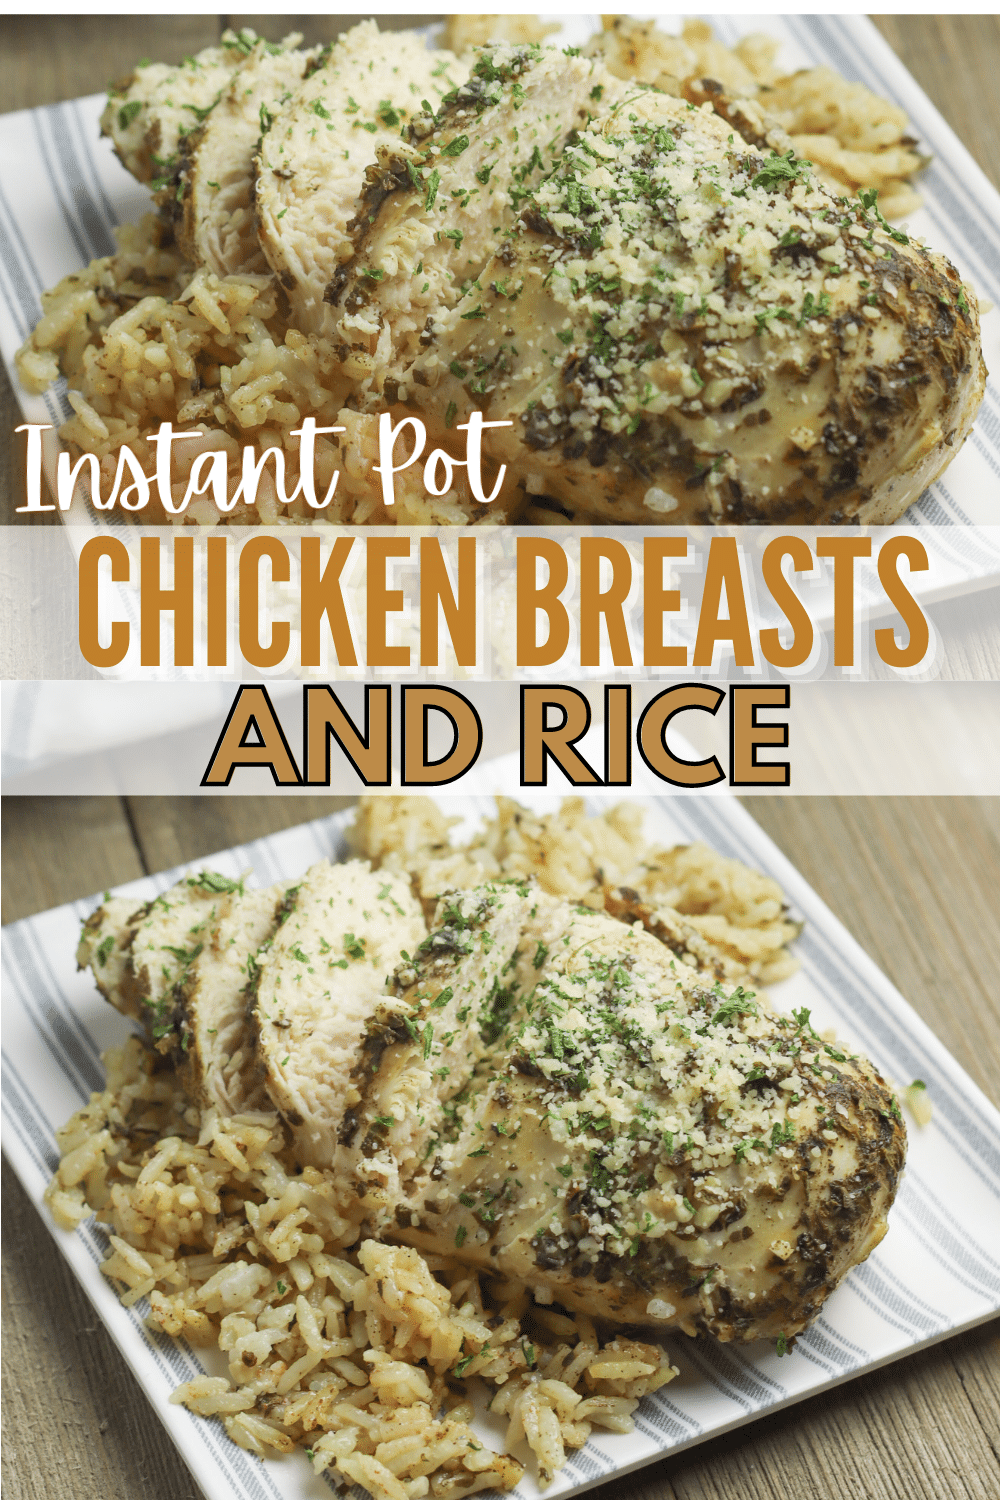 If you’re looking for an easy, delicious, and healthy chicken and rice recipe, this Instant Pot Chicken Breasts and Rice is a great option. #instantpot #pressurecooker #chickenandrice #chicken #rice via @wondermomwannab